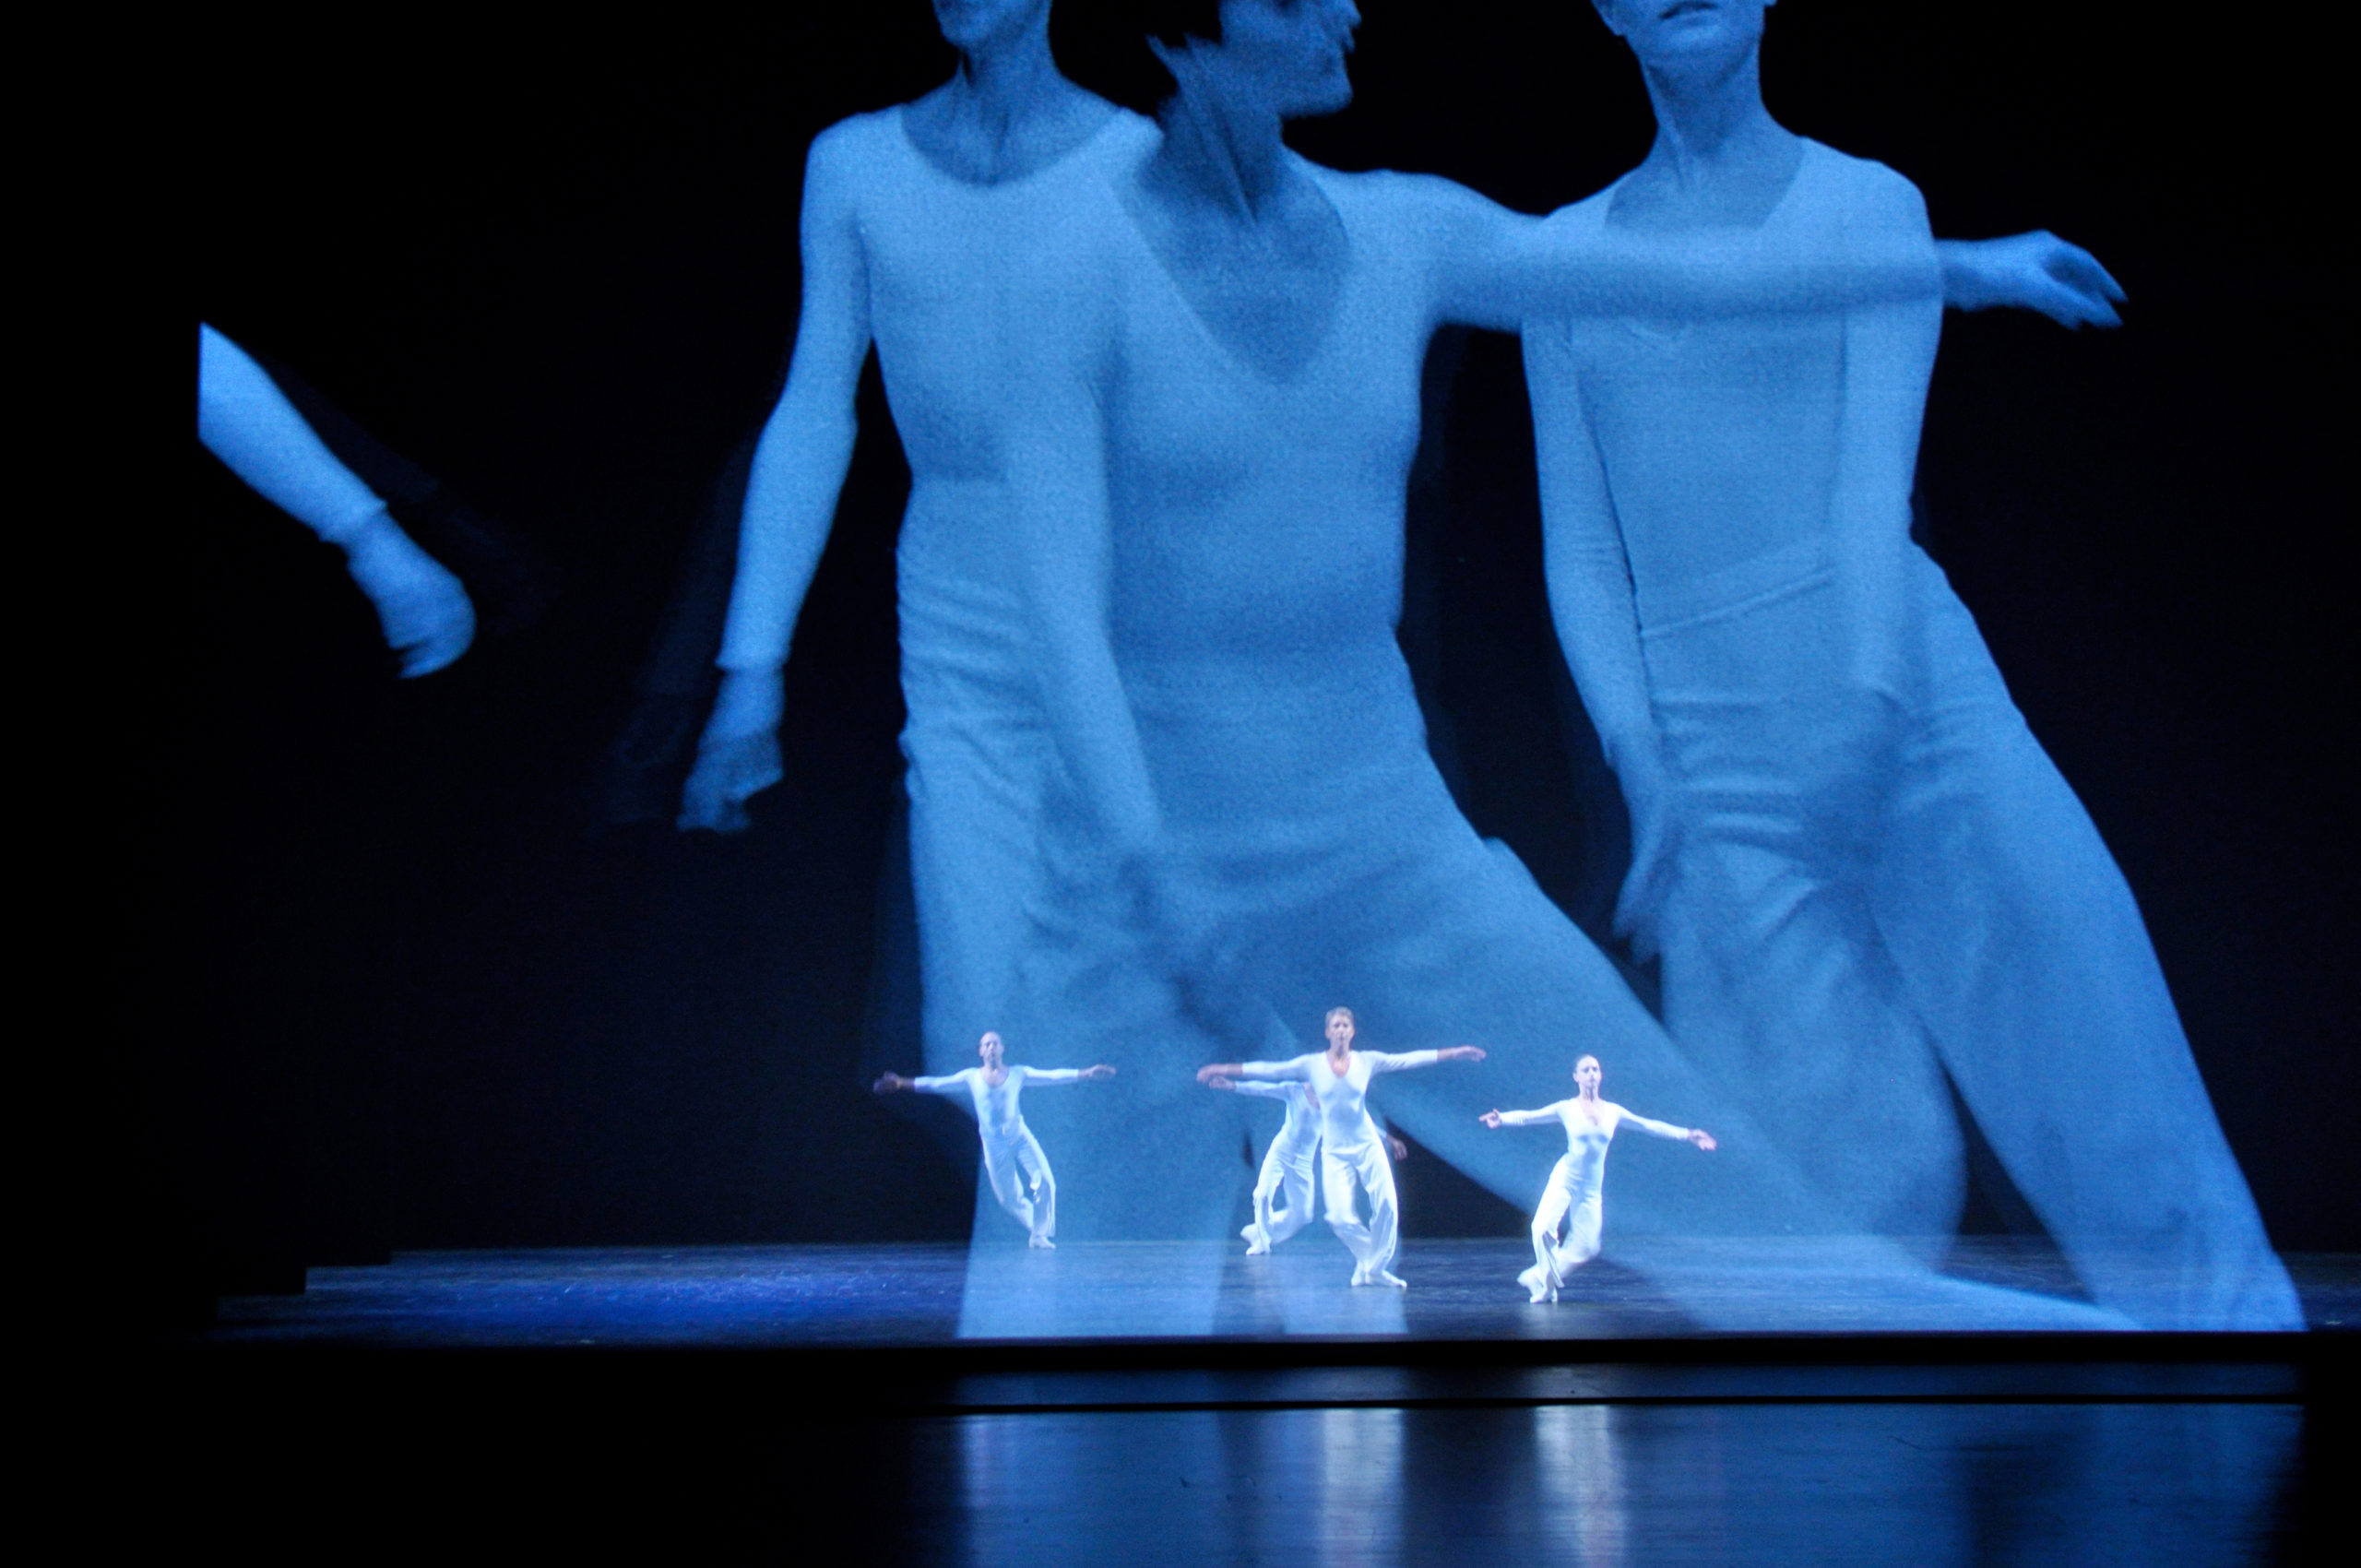 3 dancers wearing white performing on stage